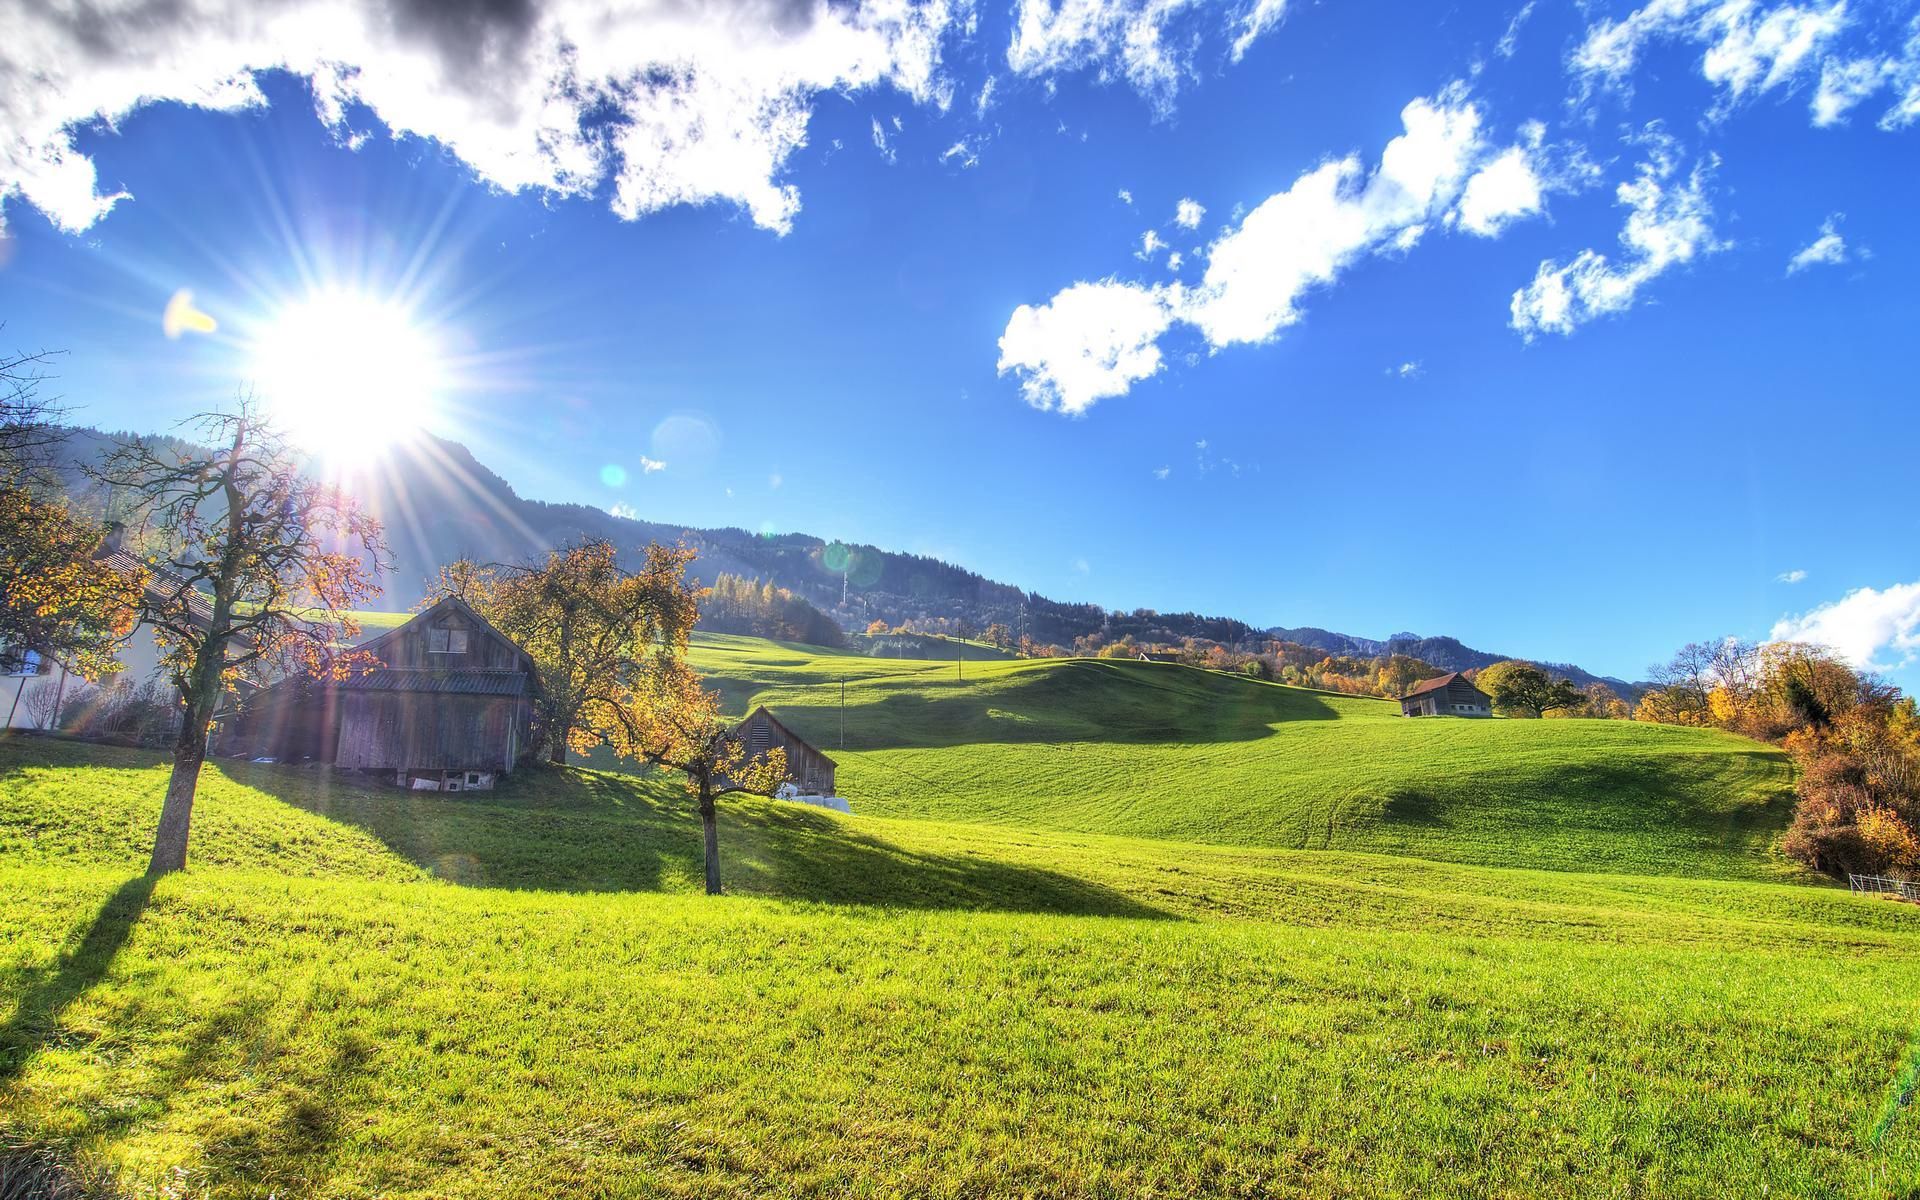 warmth, lawn, fields, shine, nature, autumn, sun, light, beams, rays, small house, lodge, heat, slopes, lawns, indian summer images